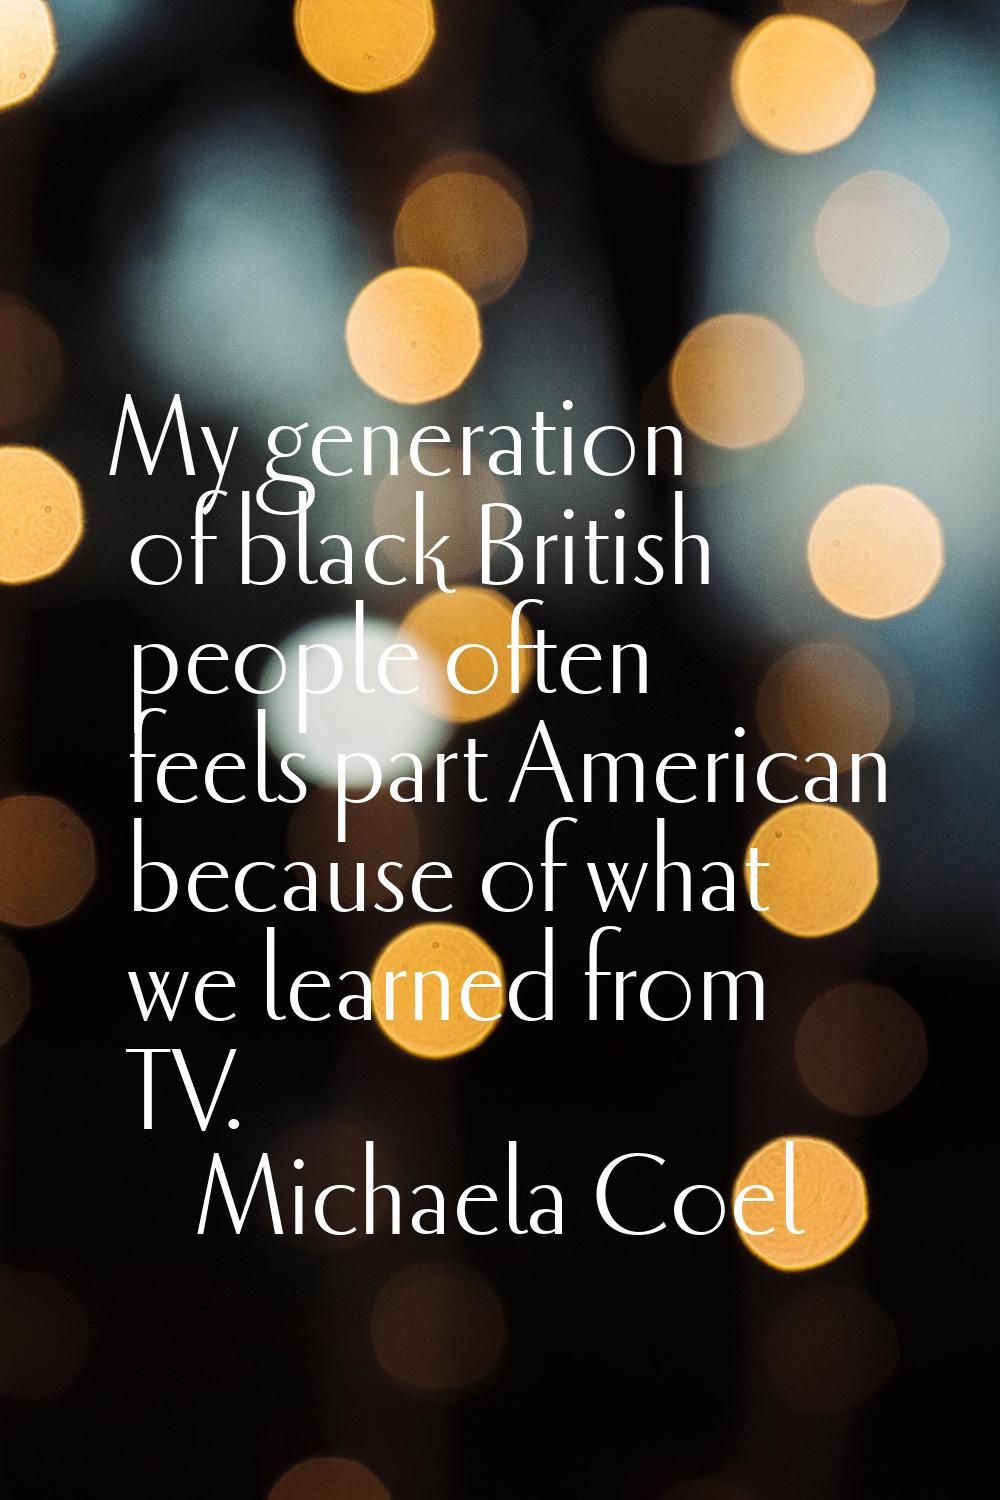 My generation of black British people often feels part American because of what we learned from TV.